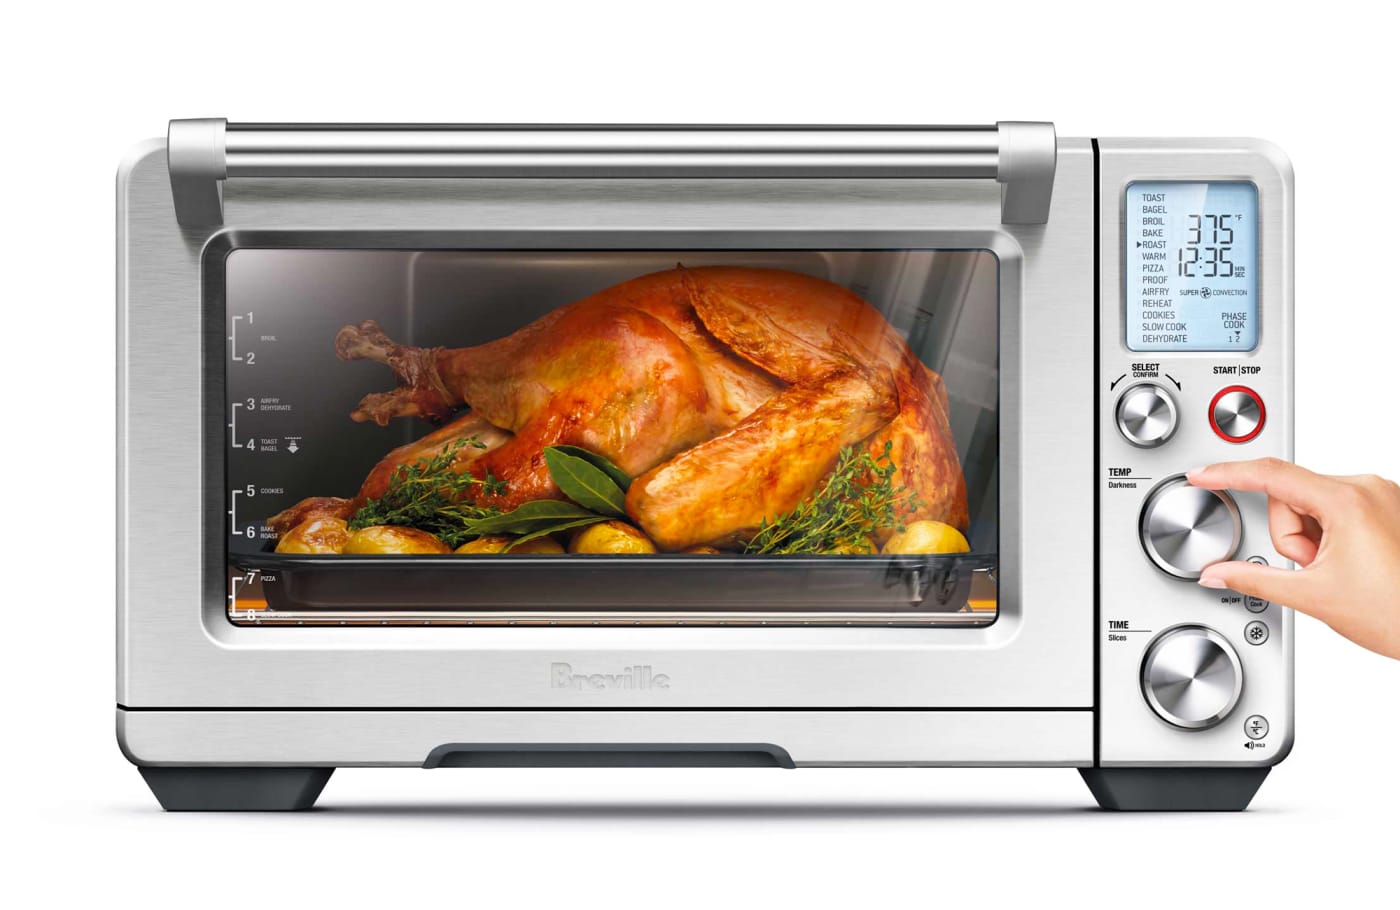 Breville's Smart Oven Air Fryer Pro is 20 percent off on Amazon